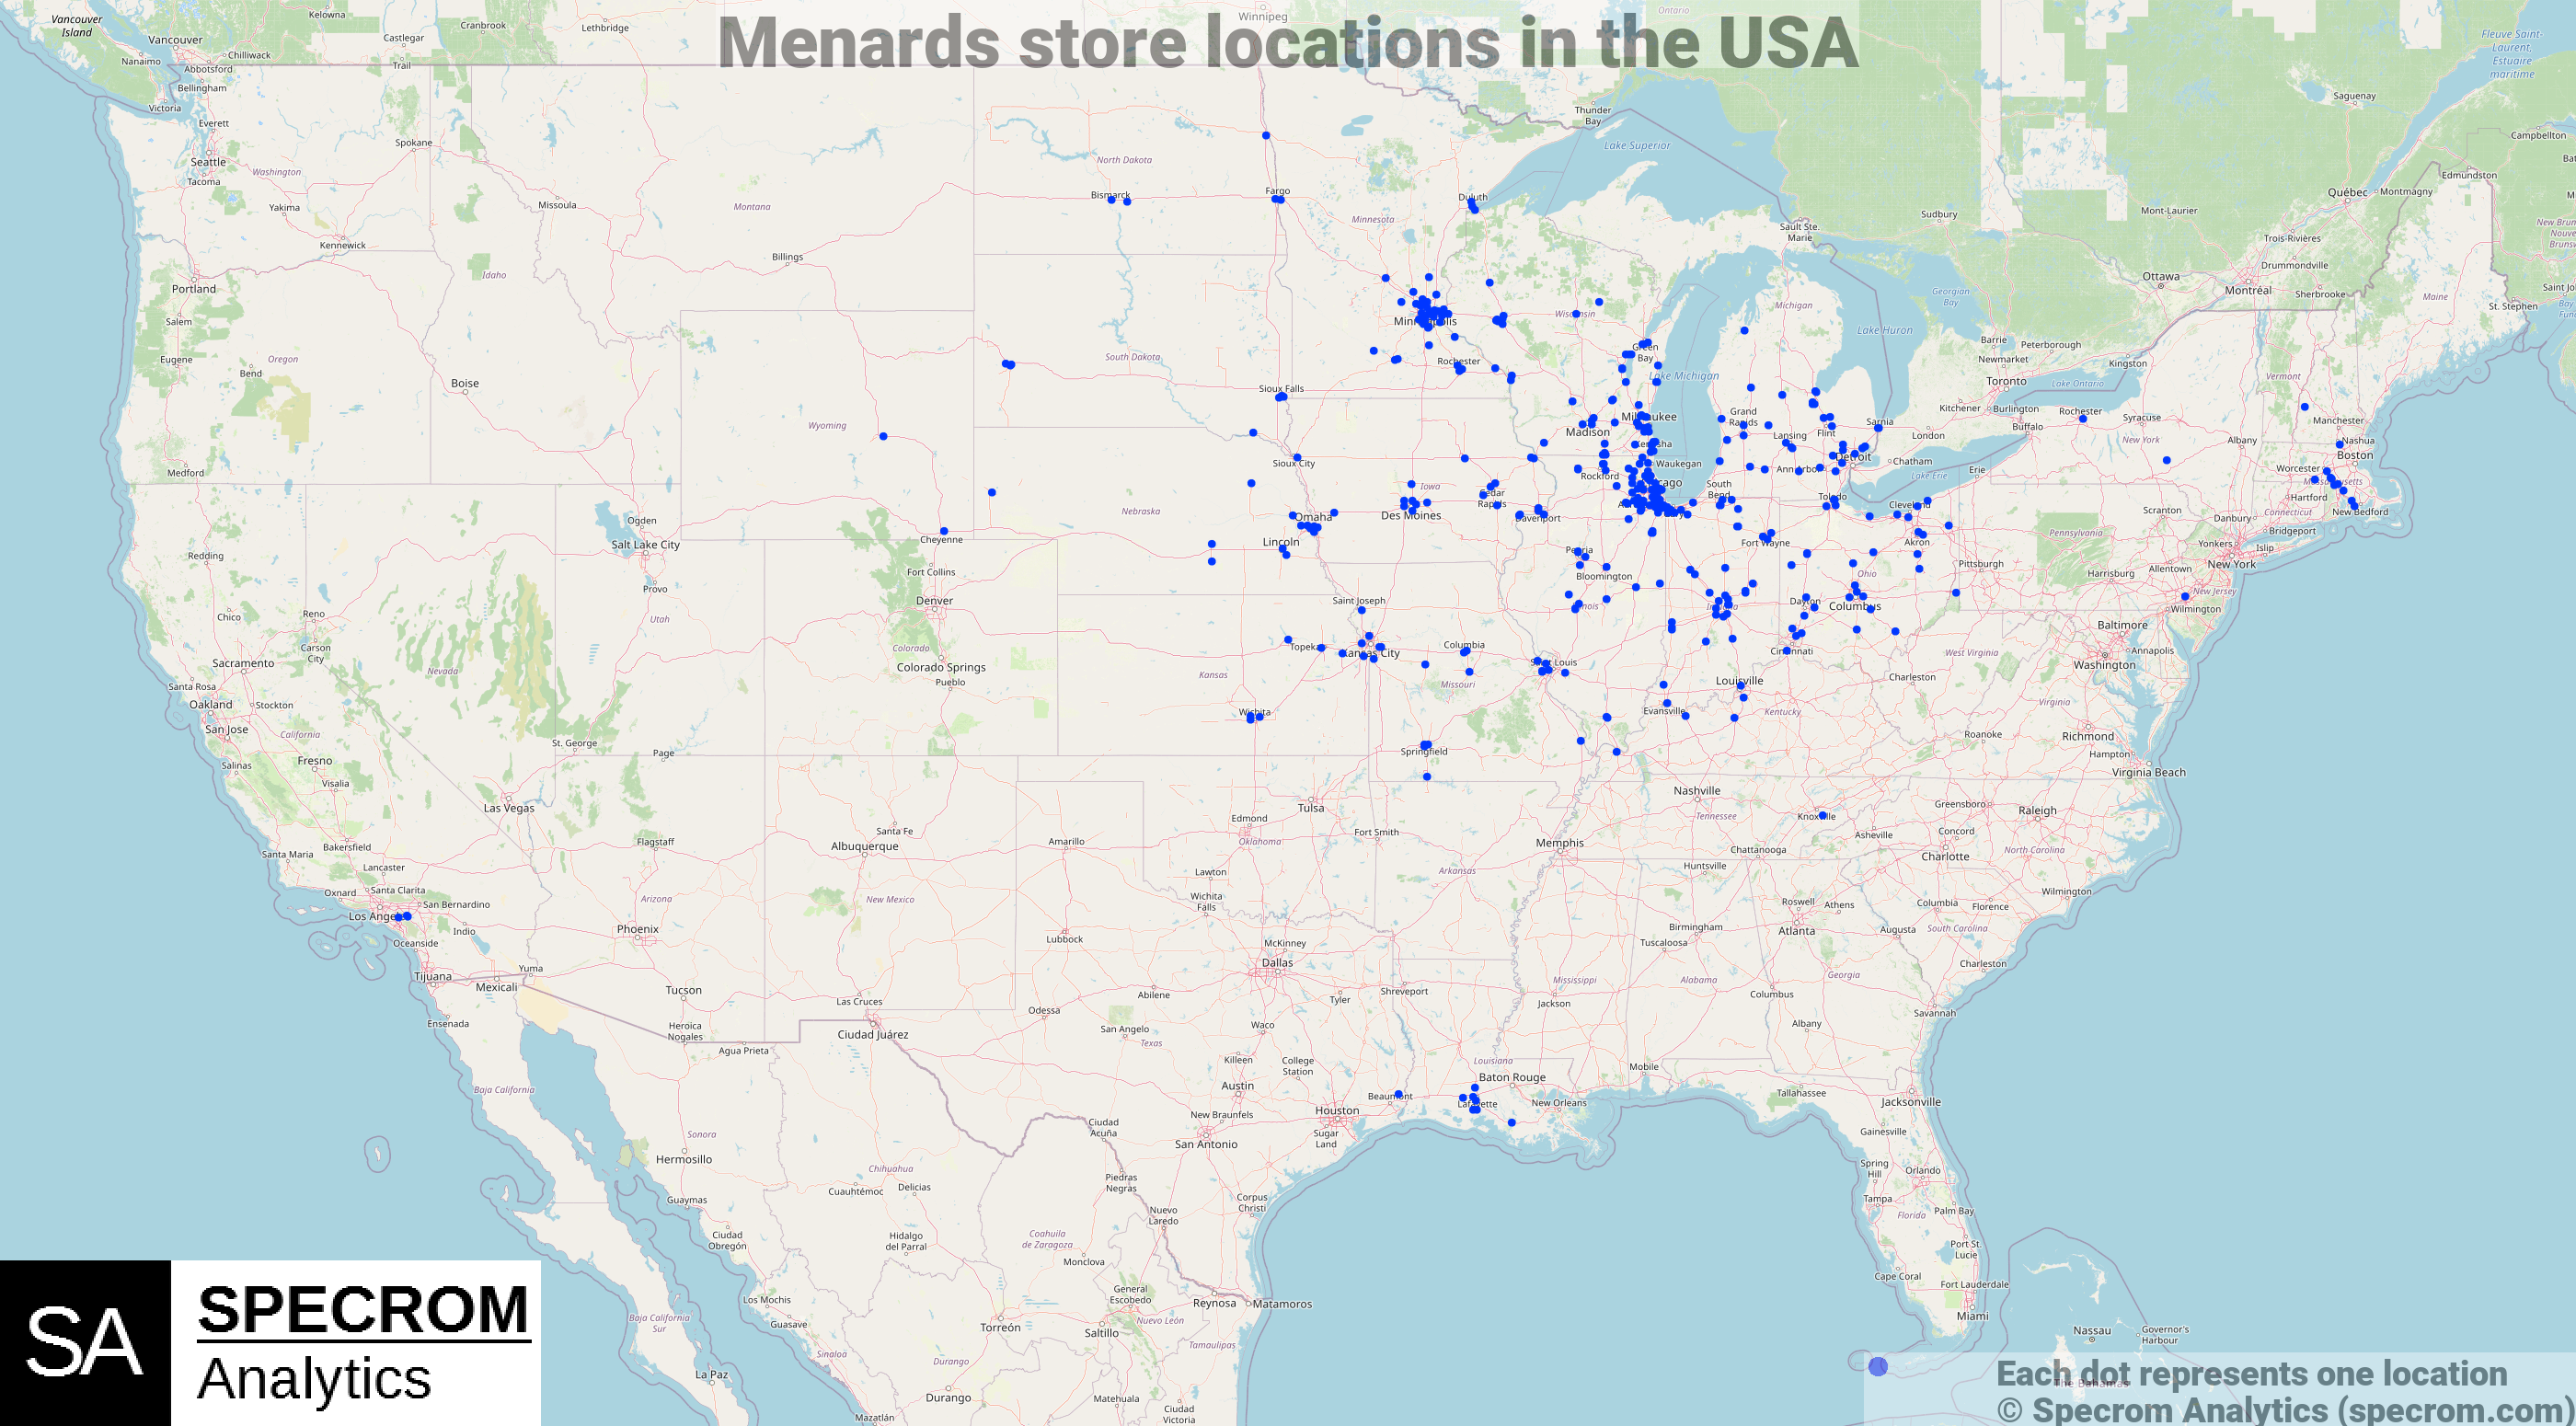 Menards store locations in the USA